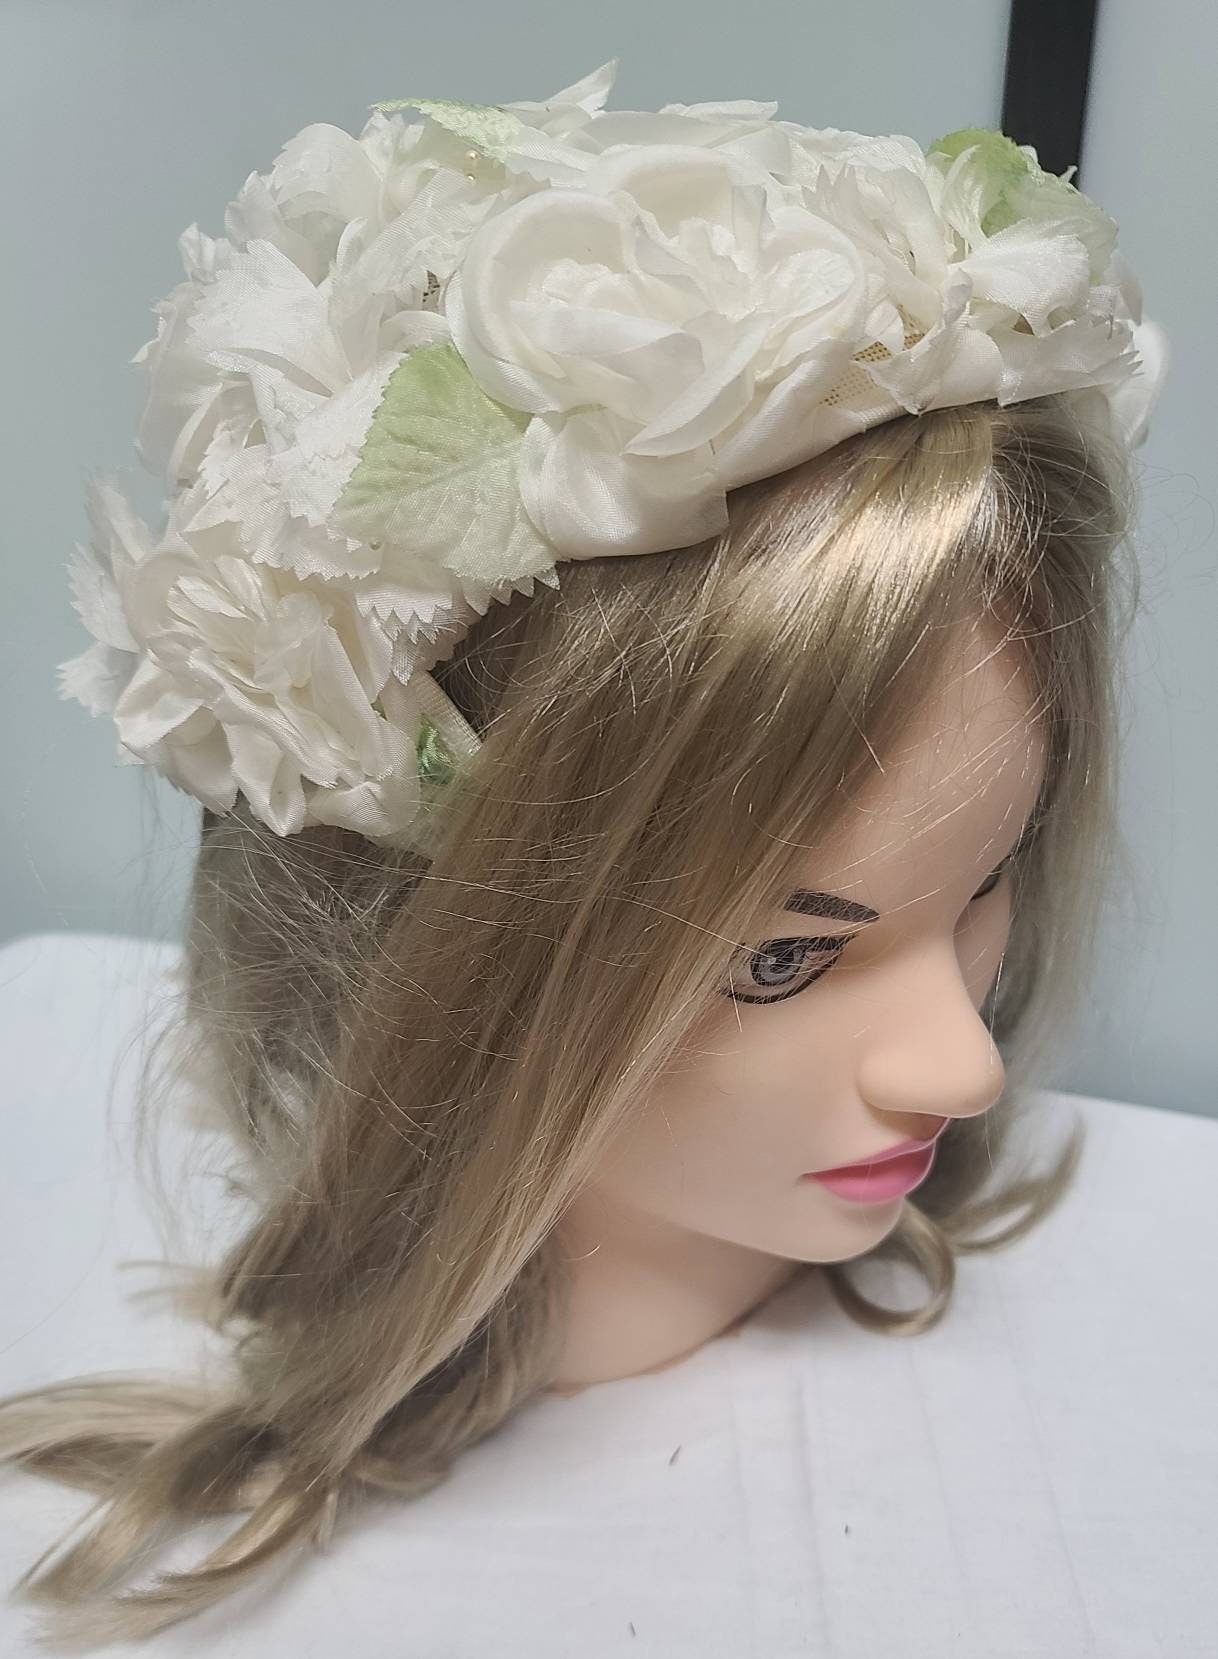 Vintage Half Hat 1950s White Floral Clamp Hat Lt Green Leaves Tiny Pearl Stamens Rockabilly Wedding Bridal Headpiece